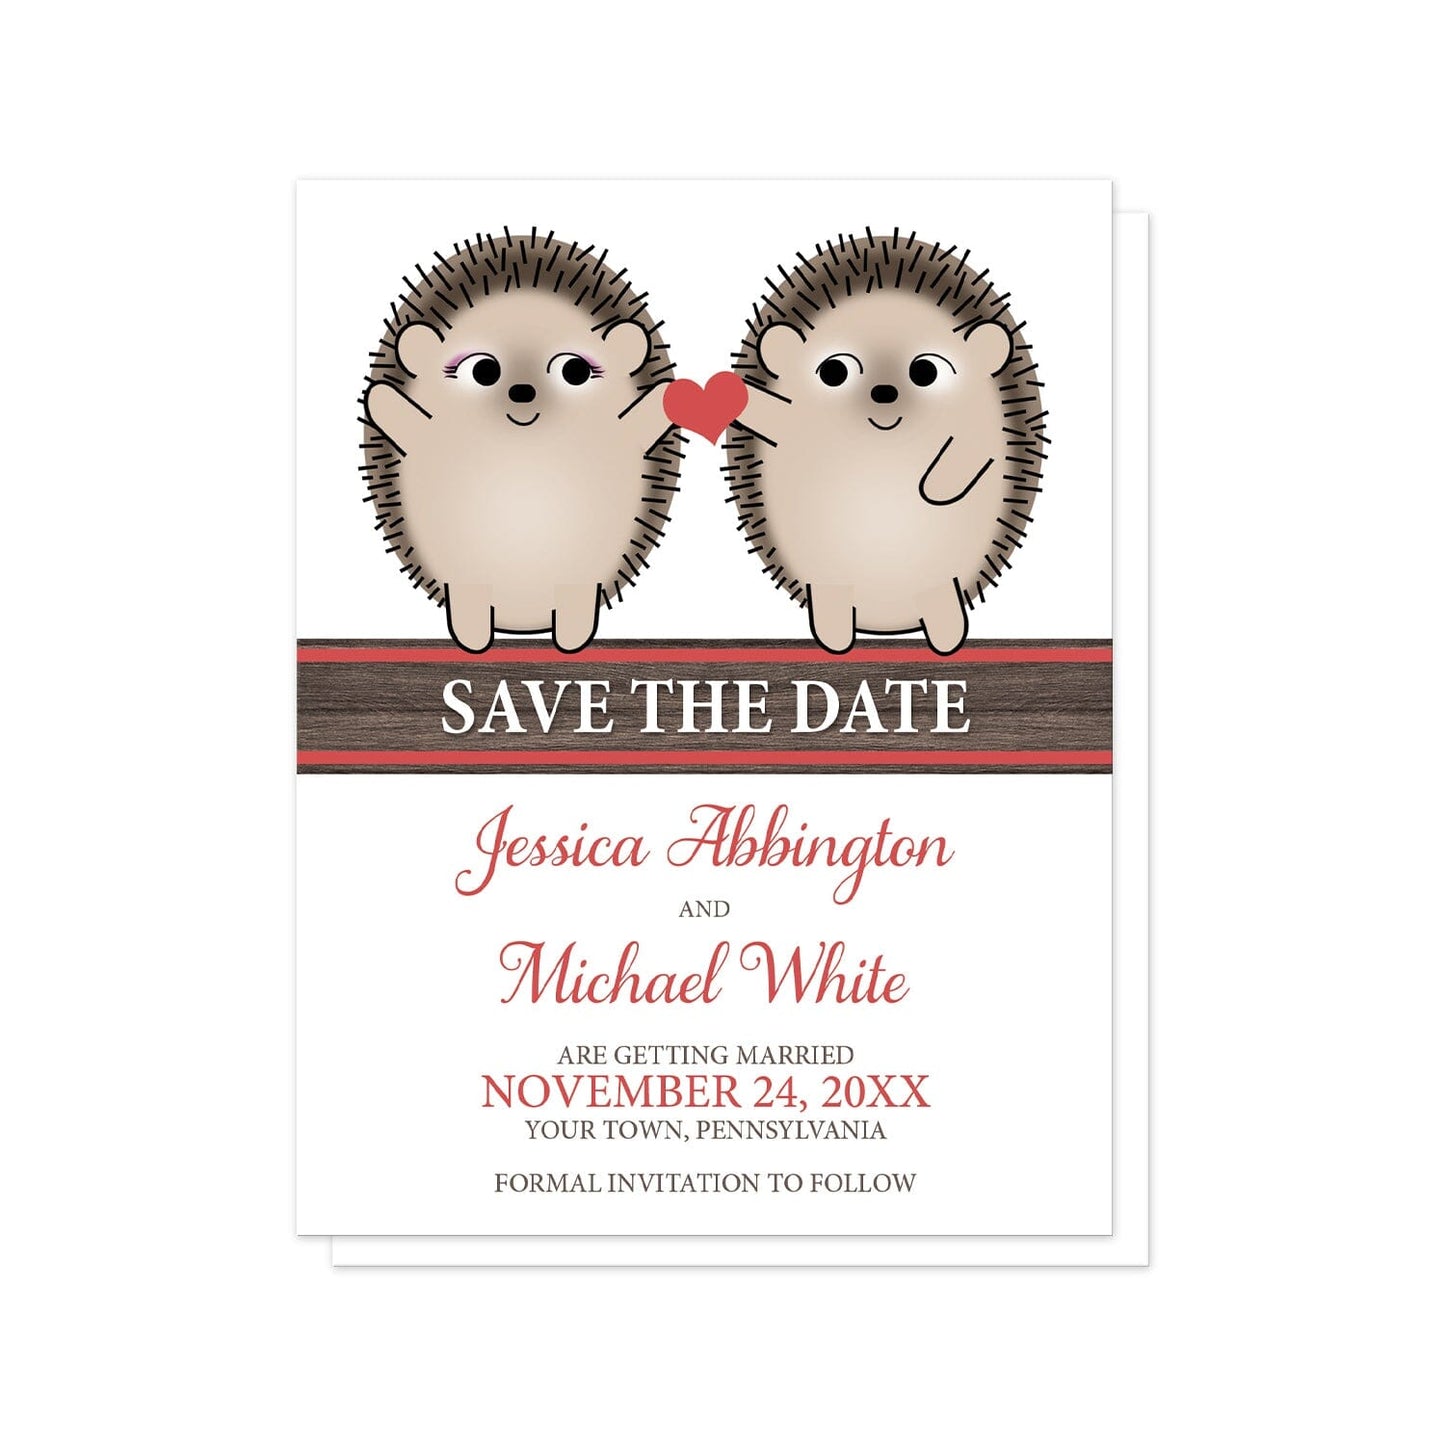 Cute Hedgehogs Holding Red Heart Save the Date Cards at Artistically Invited. Cute hedgehogs holding red heart save the date cards with two adorable brown hedgehogs smiling at each other, holding a red heart between them as an expression of love and affection. Across the center area of these cards is 'save the date' in white over a red and brown wood grain stripe.